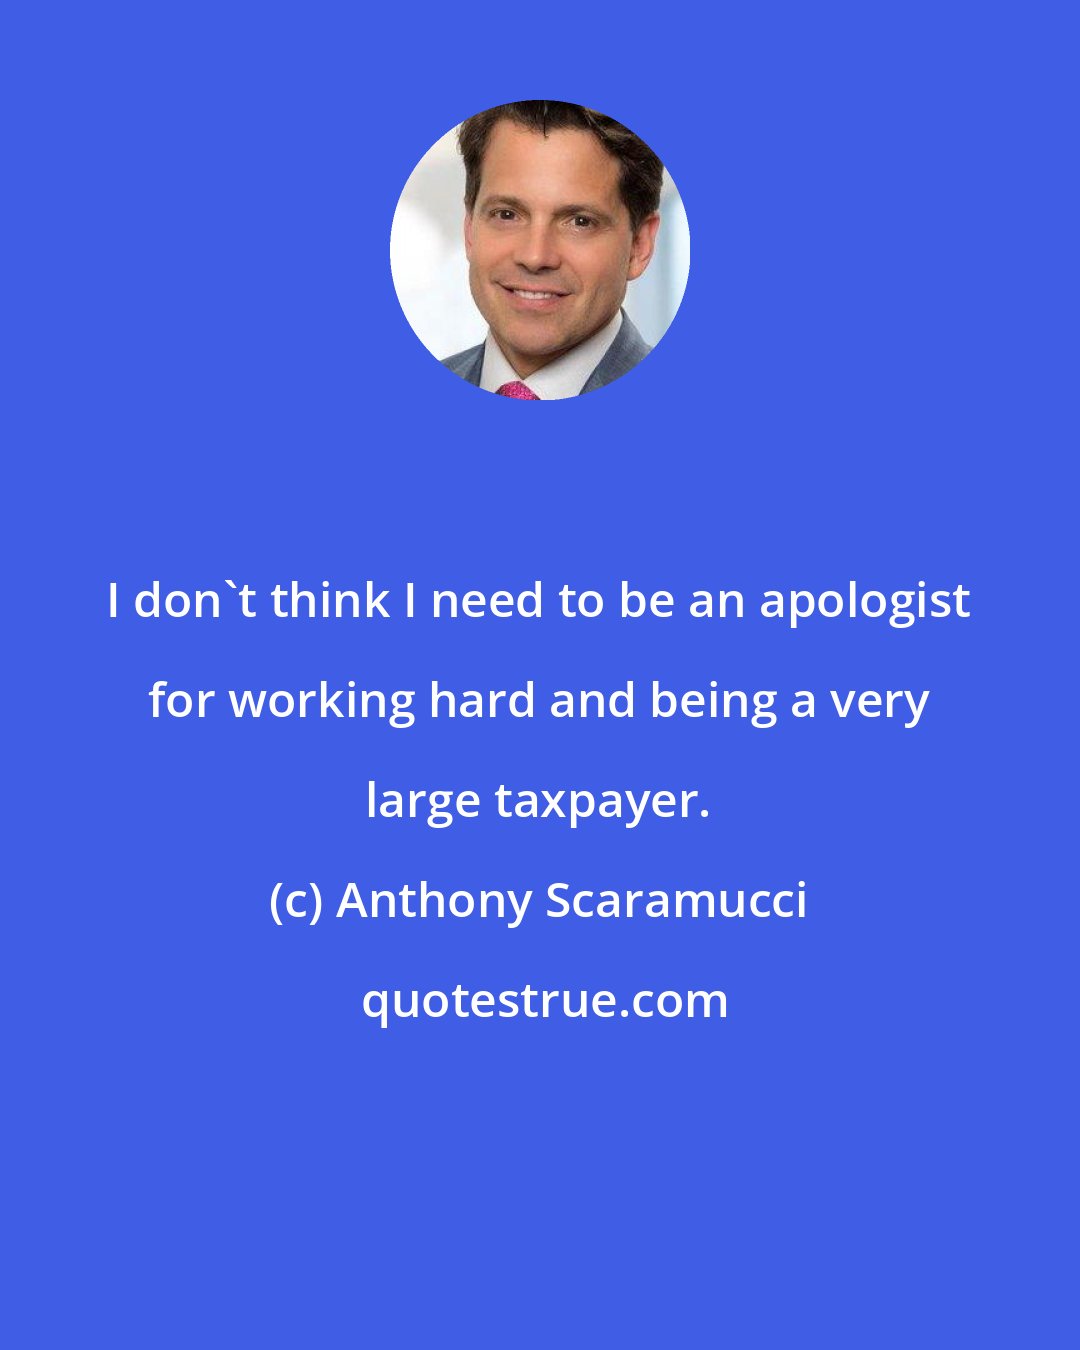 Anthony Scaramucci: I don't think I need to be an apologist for working hard and being a very large taxpayer.